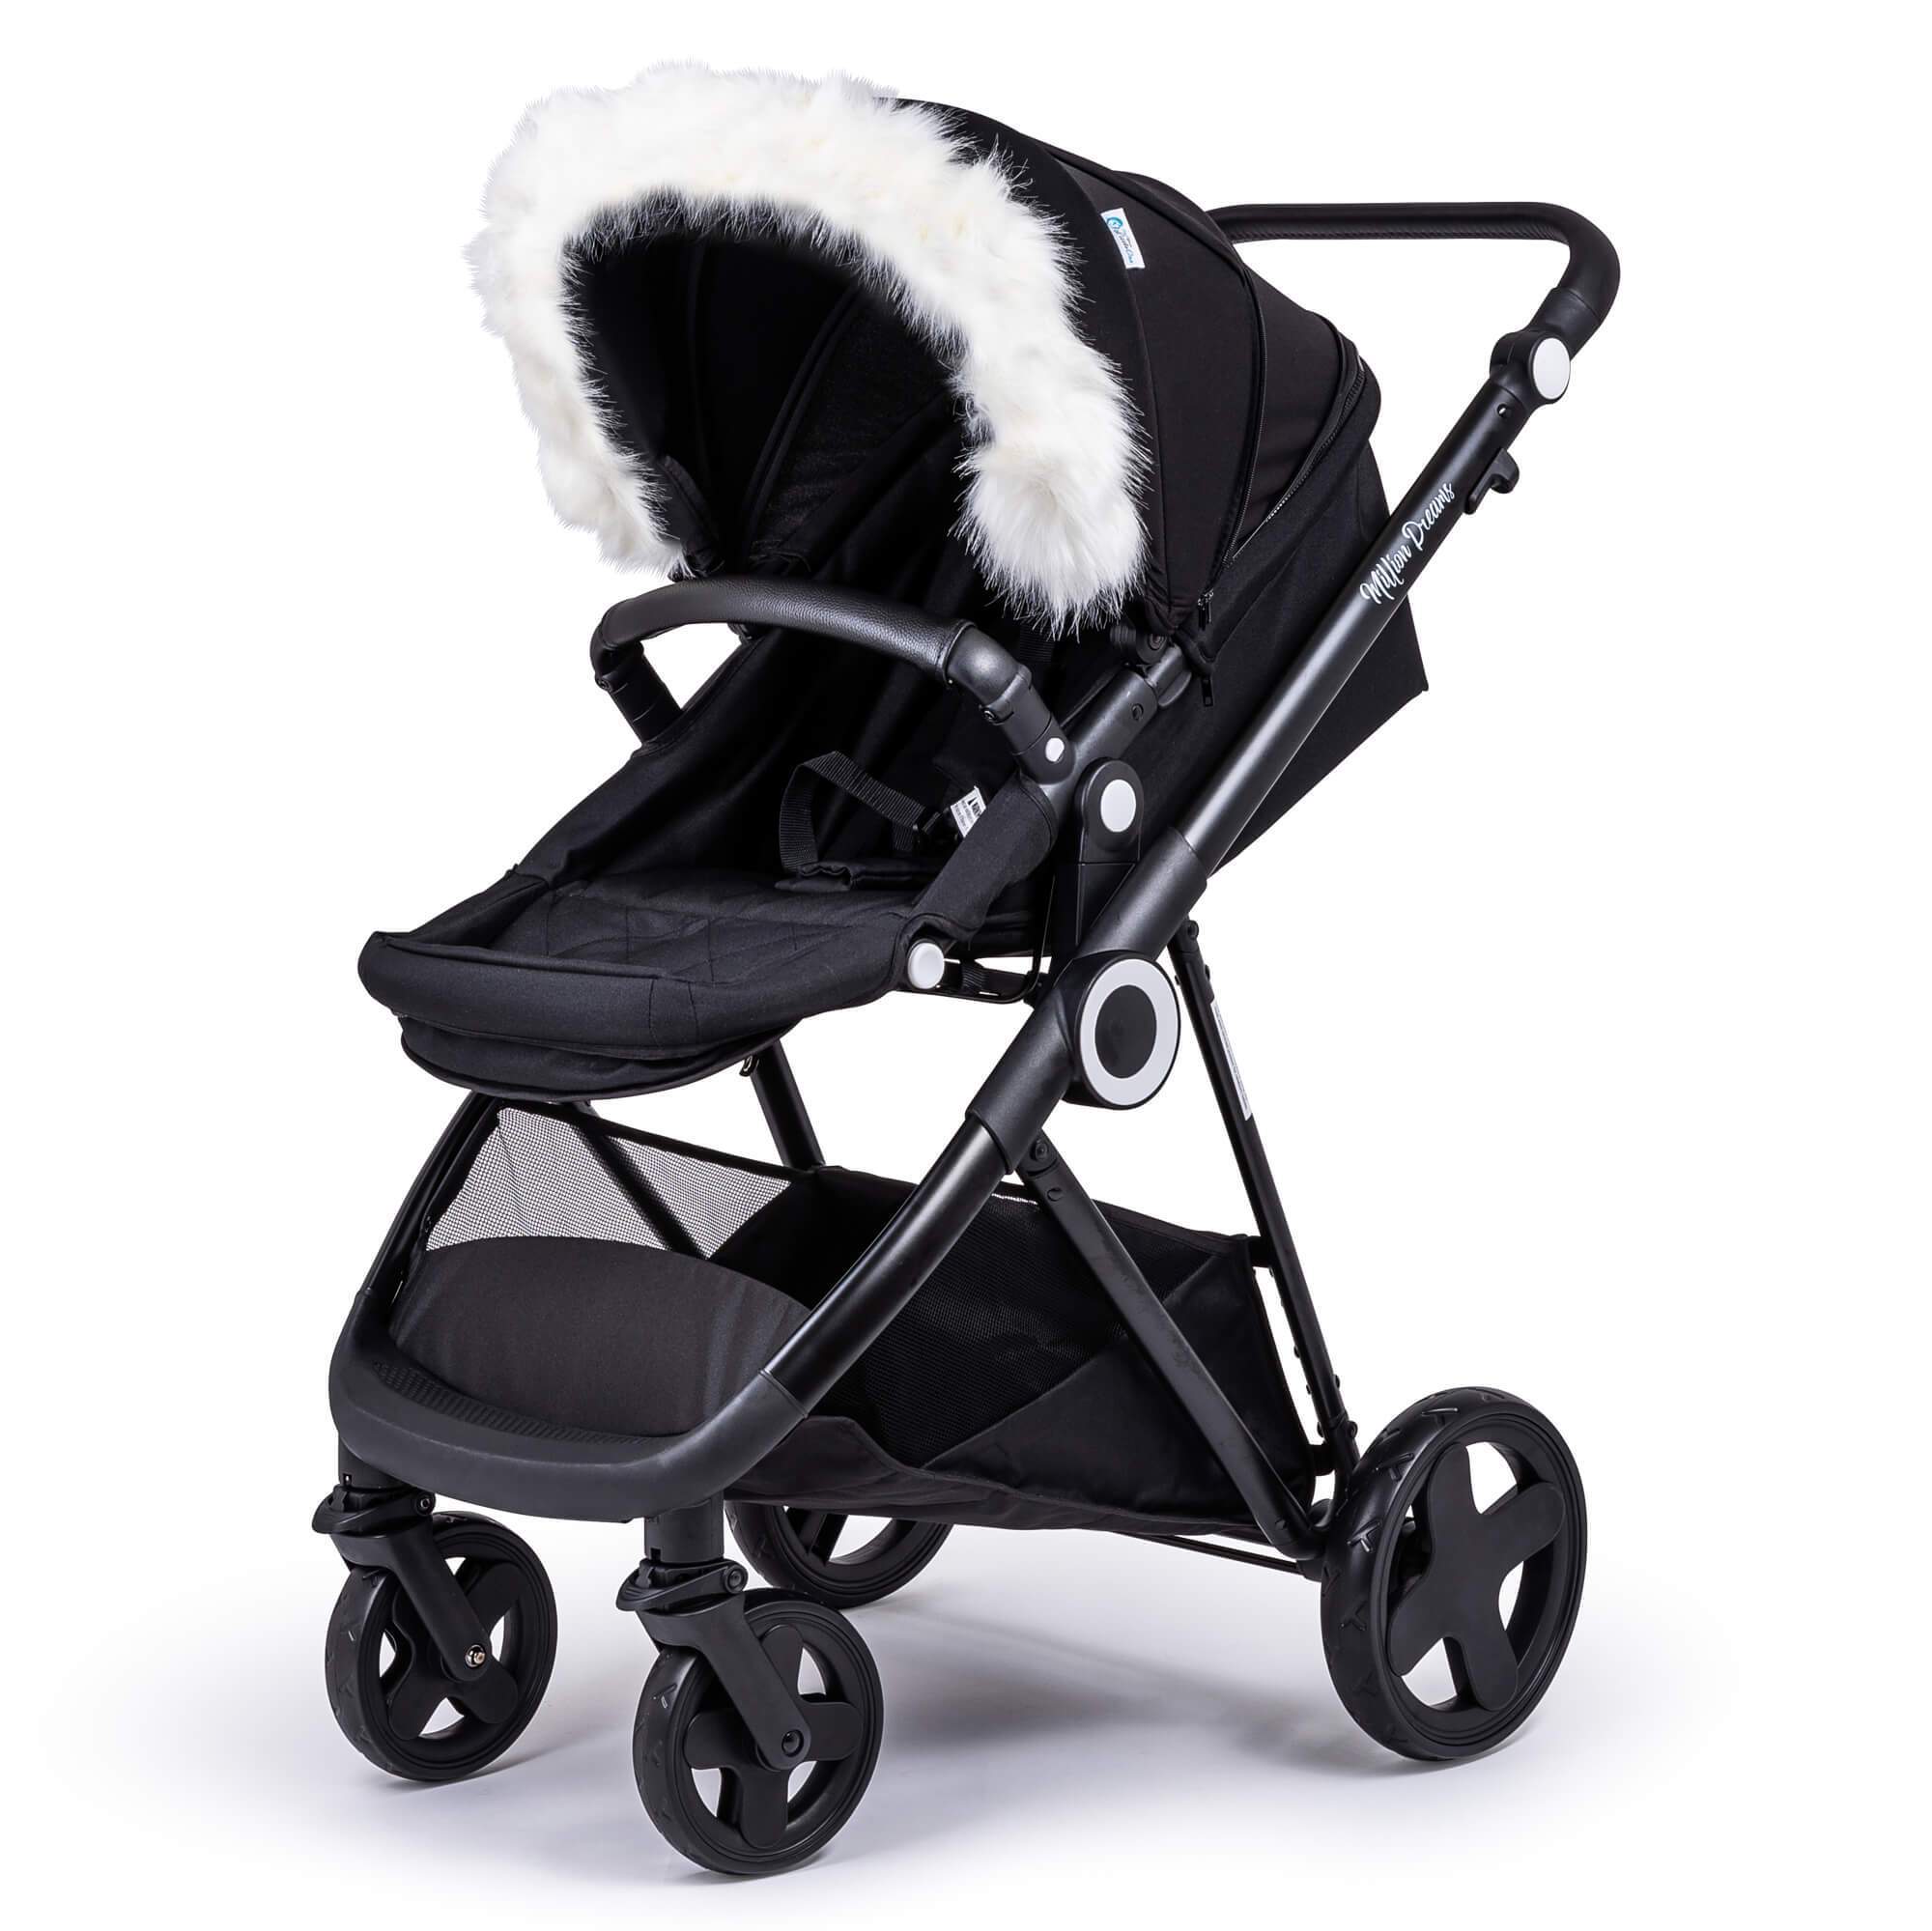 Pram Fur Hood Trim Attachment for Pushchair Compatible with iCandy - White / Fits All Models | For Your Little One